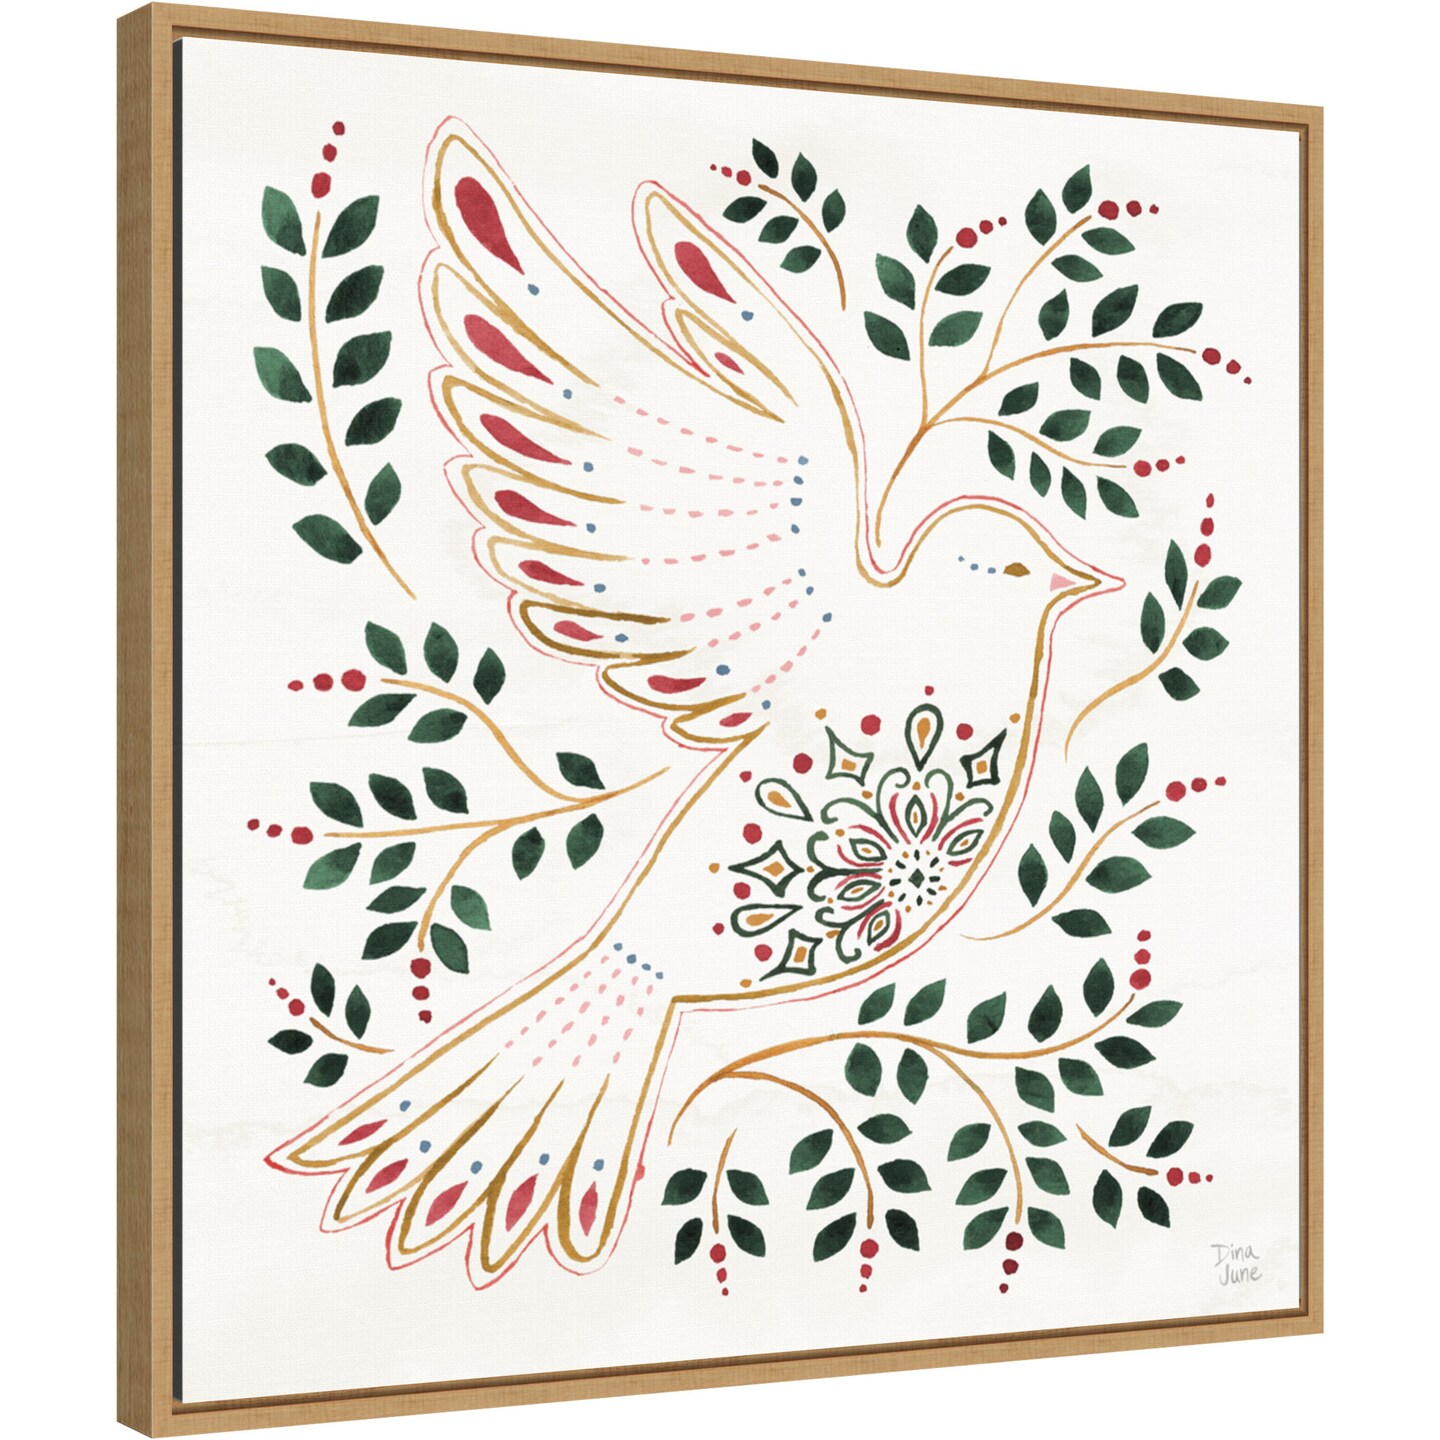 Holiday Sparkle VIII by Dina June 22-in. W x 22-in. H. Canvas Wall Art Print Framed in Natural